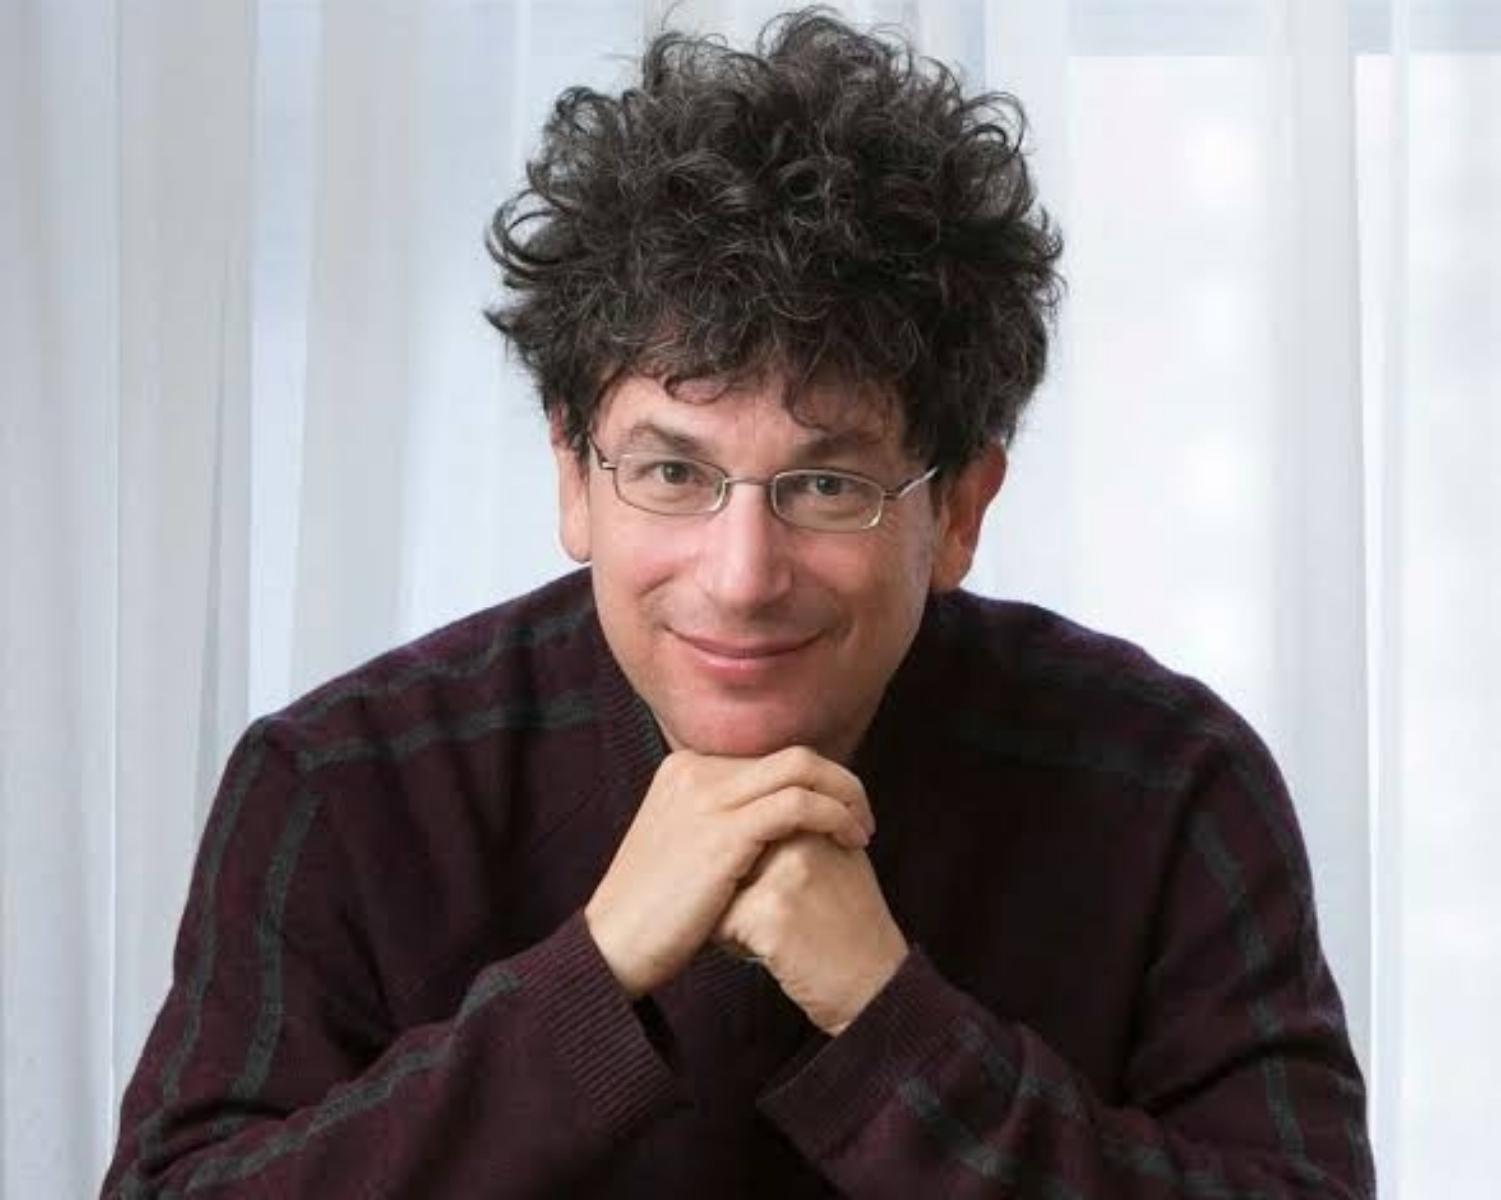 James Altucher (podcaster and best-selling author )